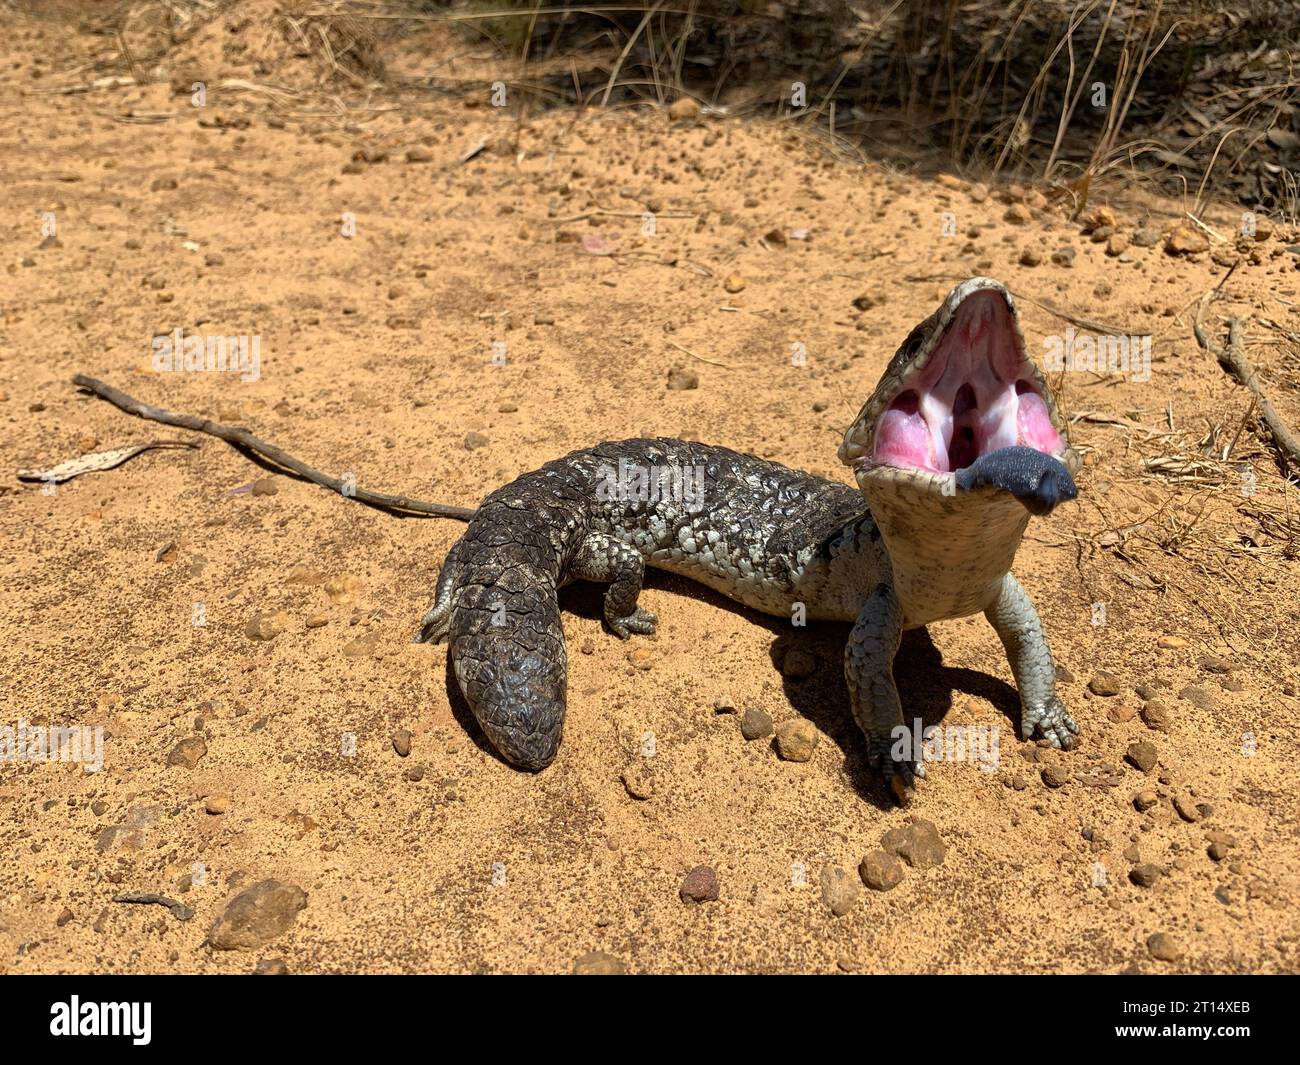 A close-up of a Western Blue-Tongued Lizard (Tiliqua occipitalis) perched on sand Stock Photo